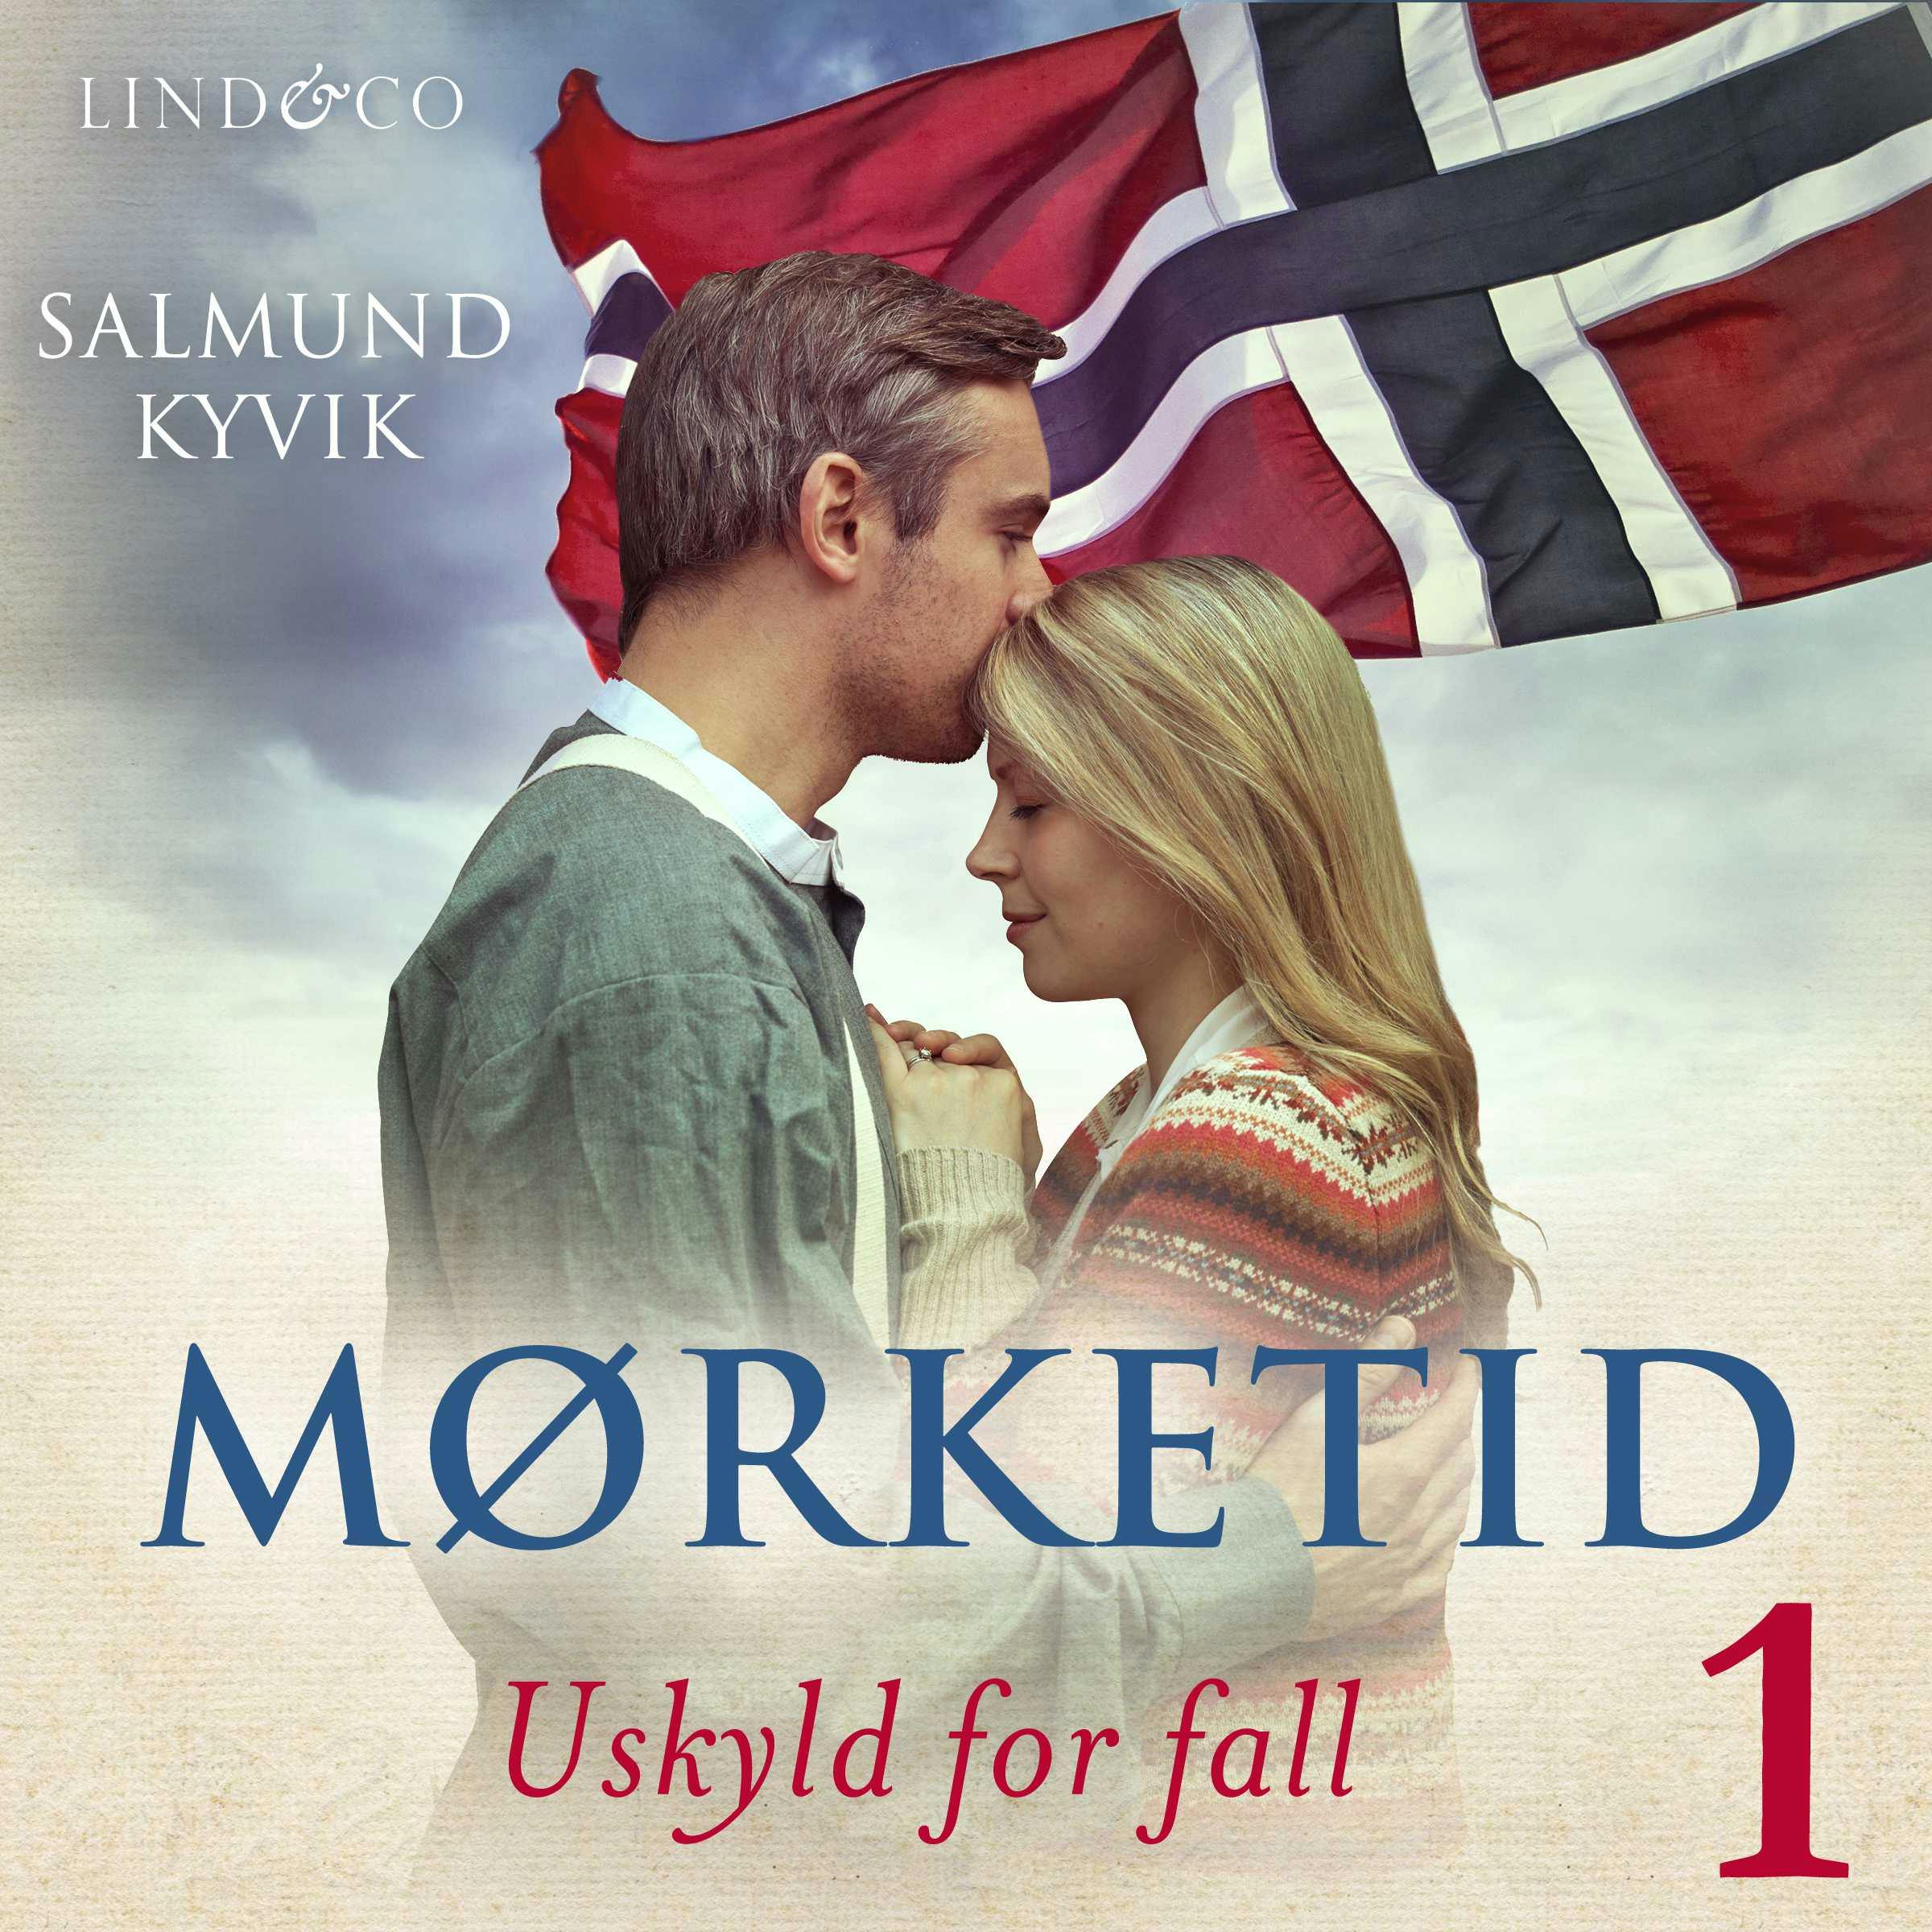 Uskyld for fall - undefined